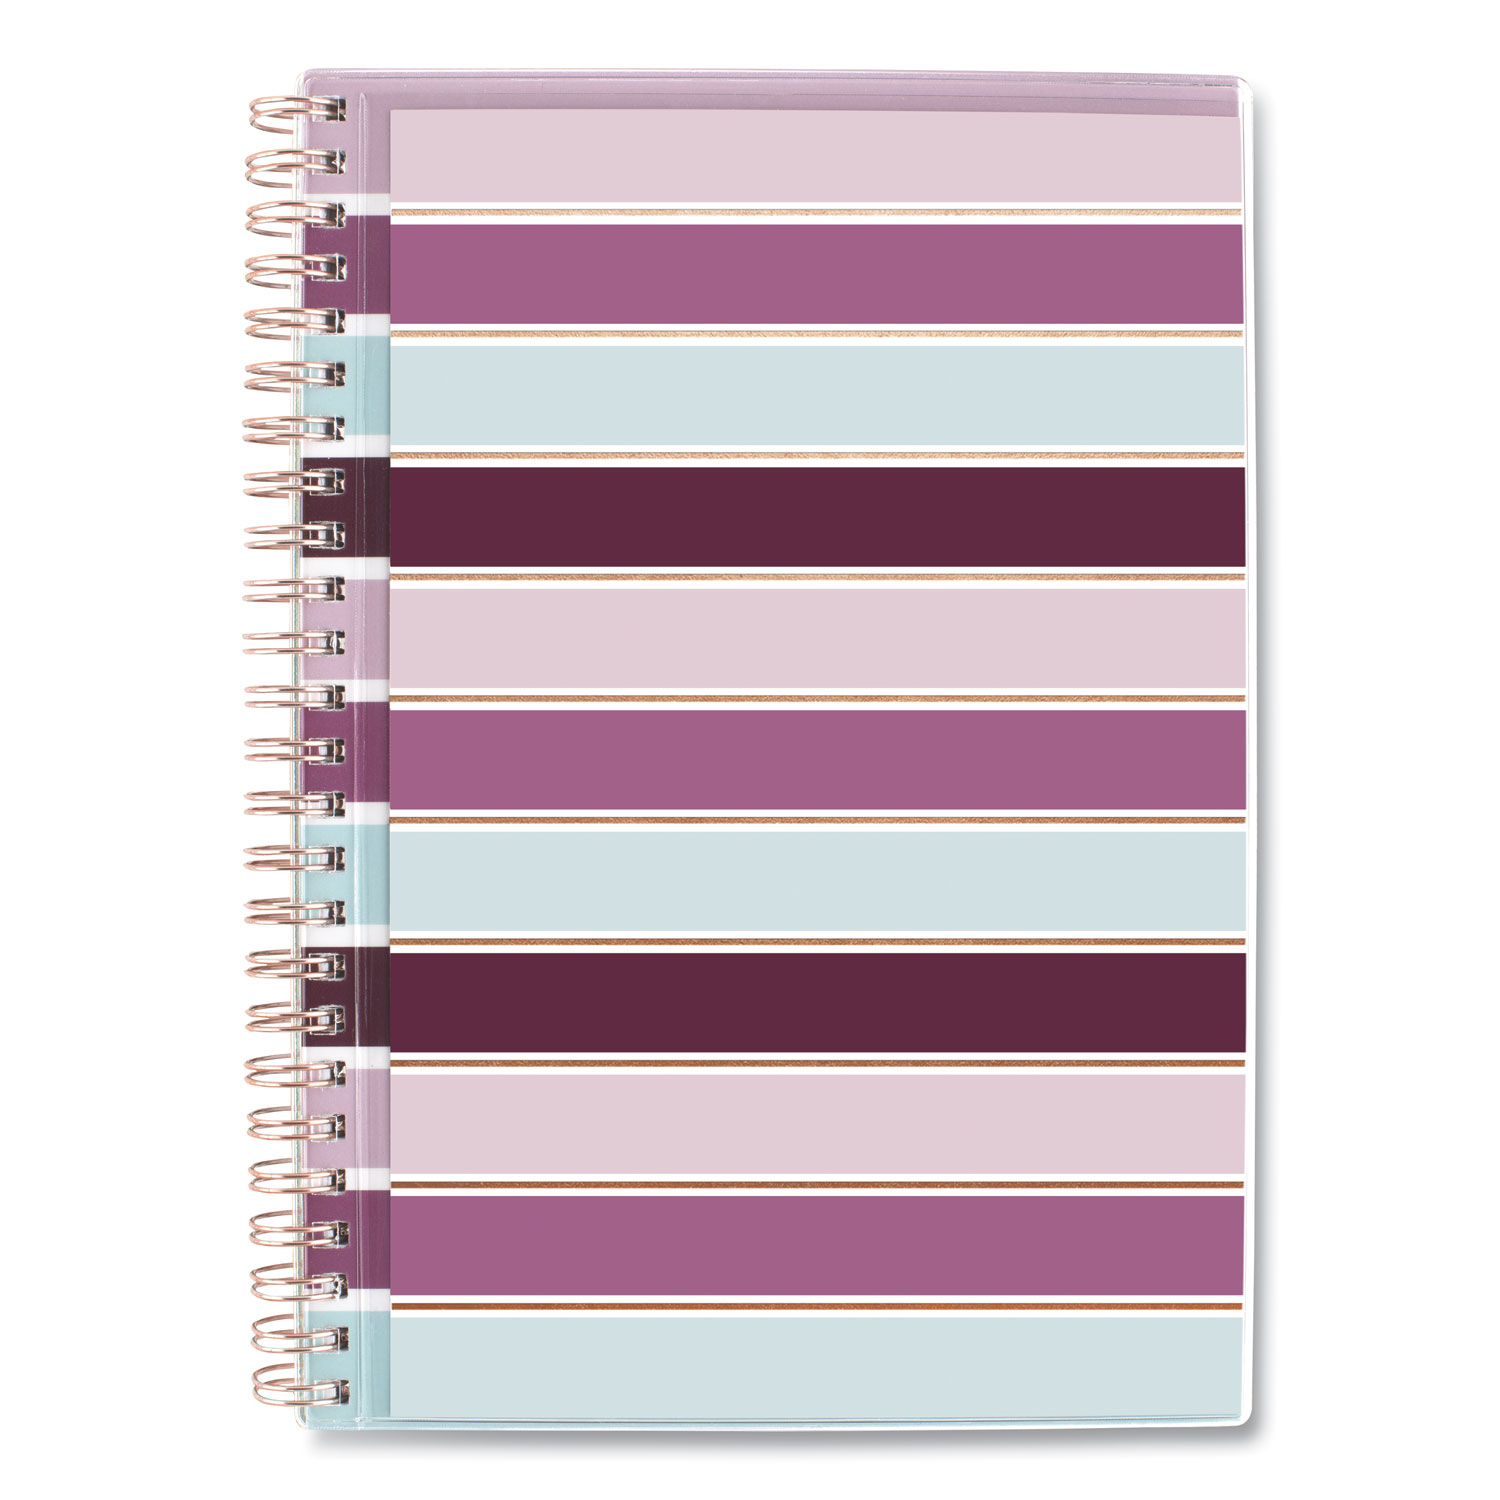  Cambridge 1455201 Ribbon Weekly/Monthly Planner, 8.5 x 5.5, Burgundy/Pink/Blue/White Striped, 2021 (AAG1455201) 